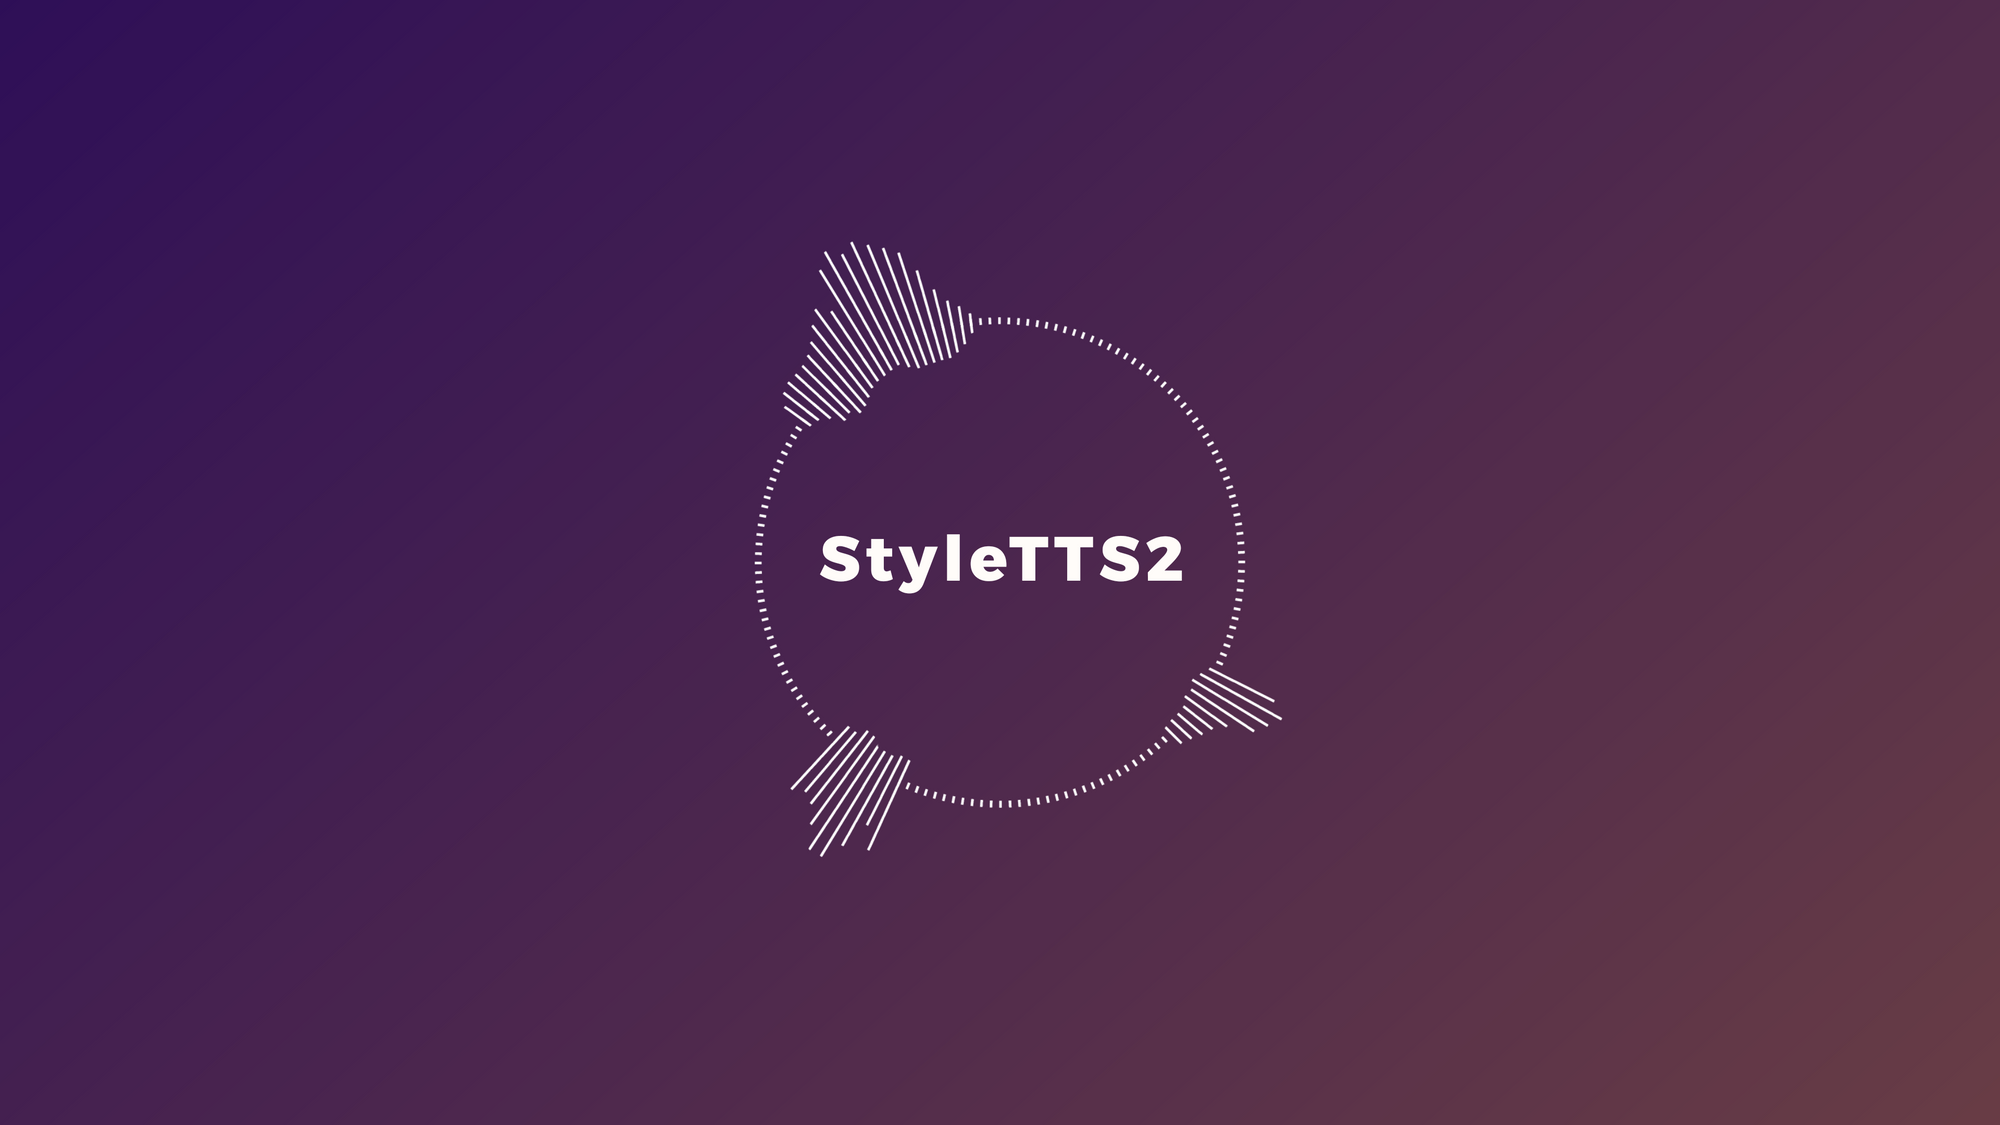 StyleTTS2: A Quest To Improve Zero-Shot Performance